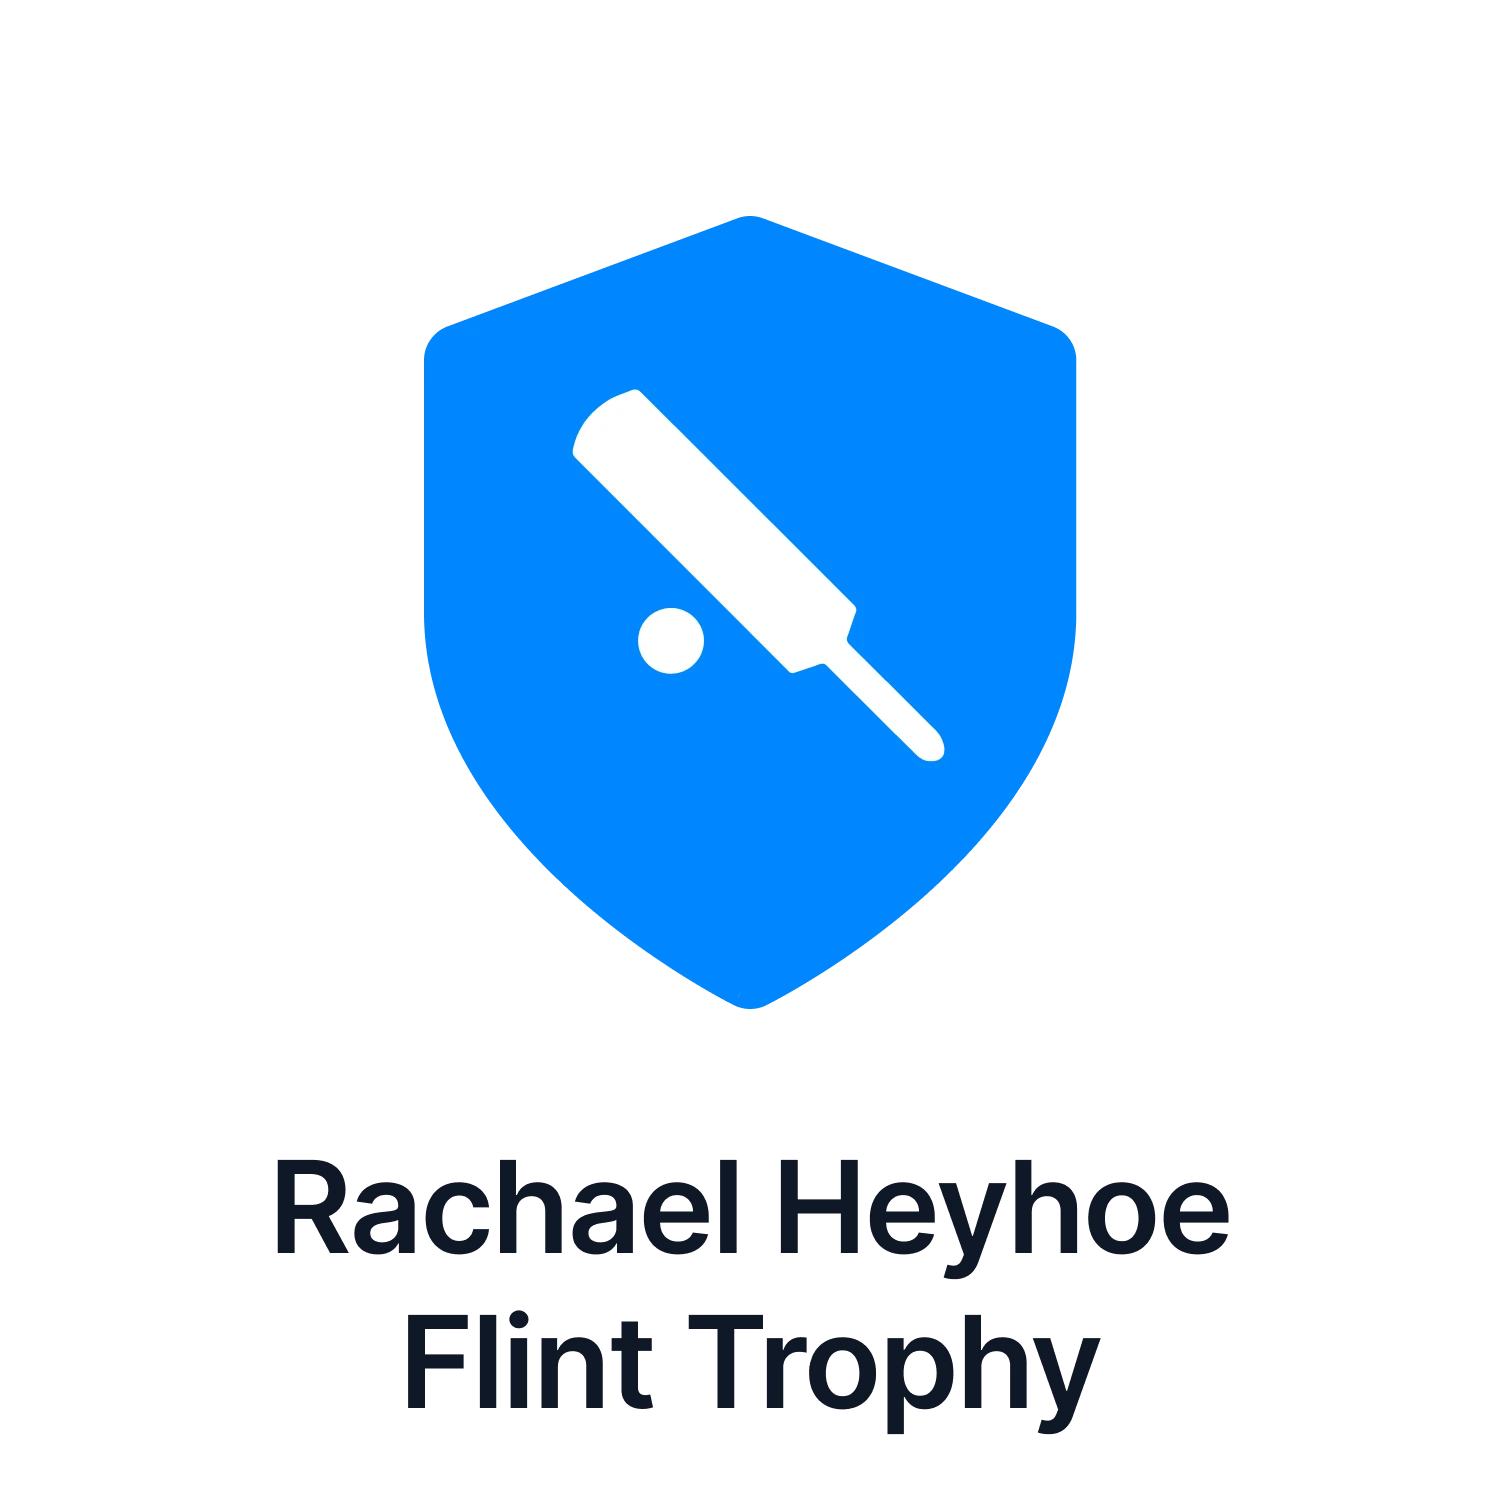 Read more about our predictions on Rachael Heyhoe Flint Trophy matches.